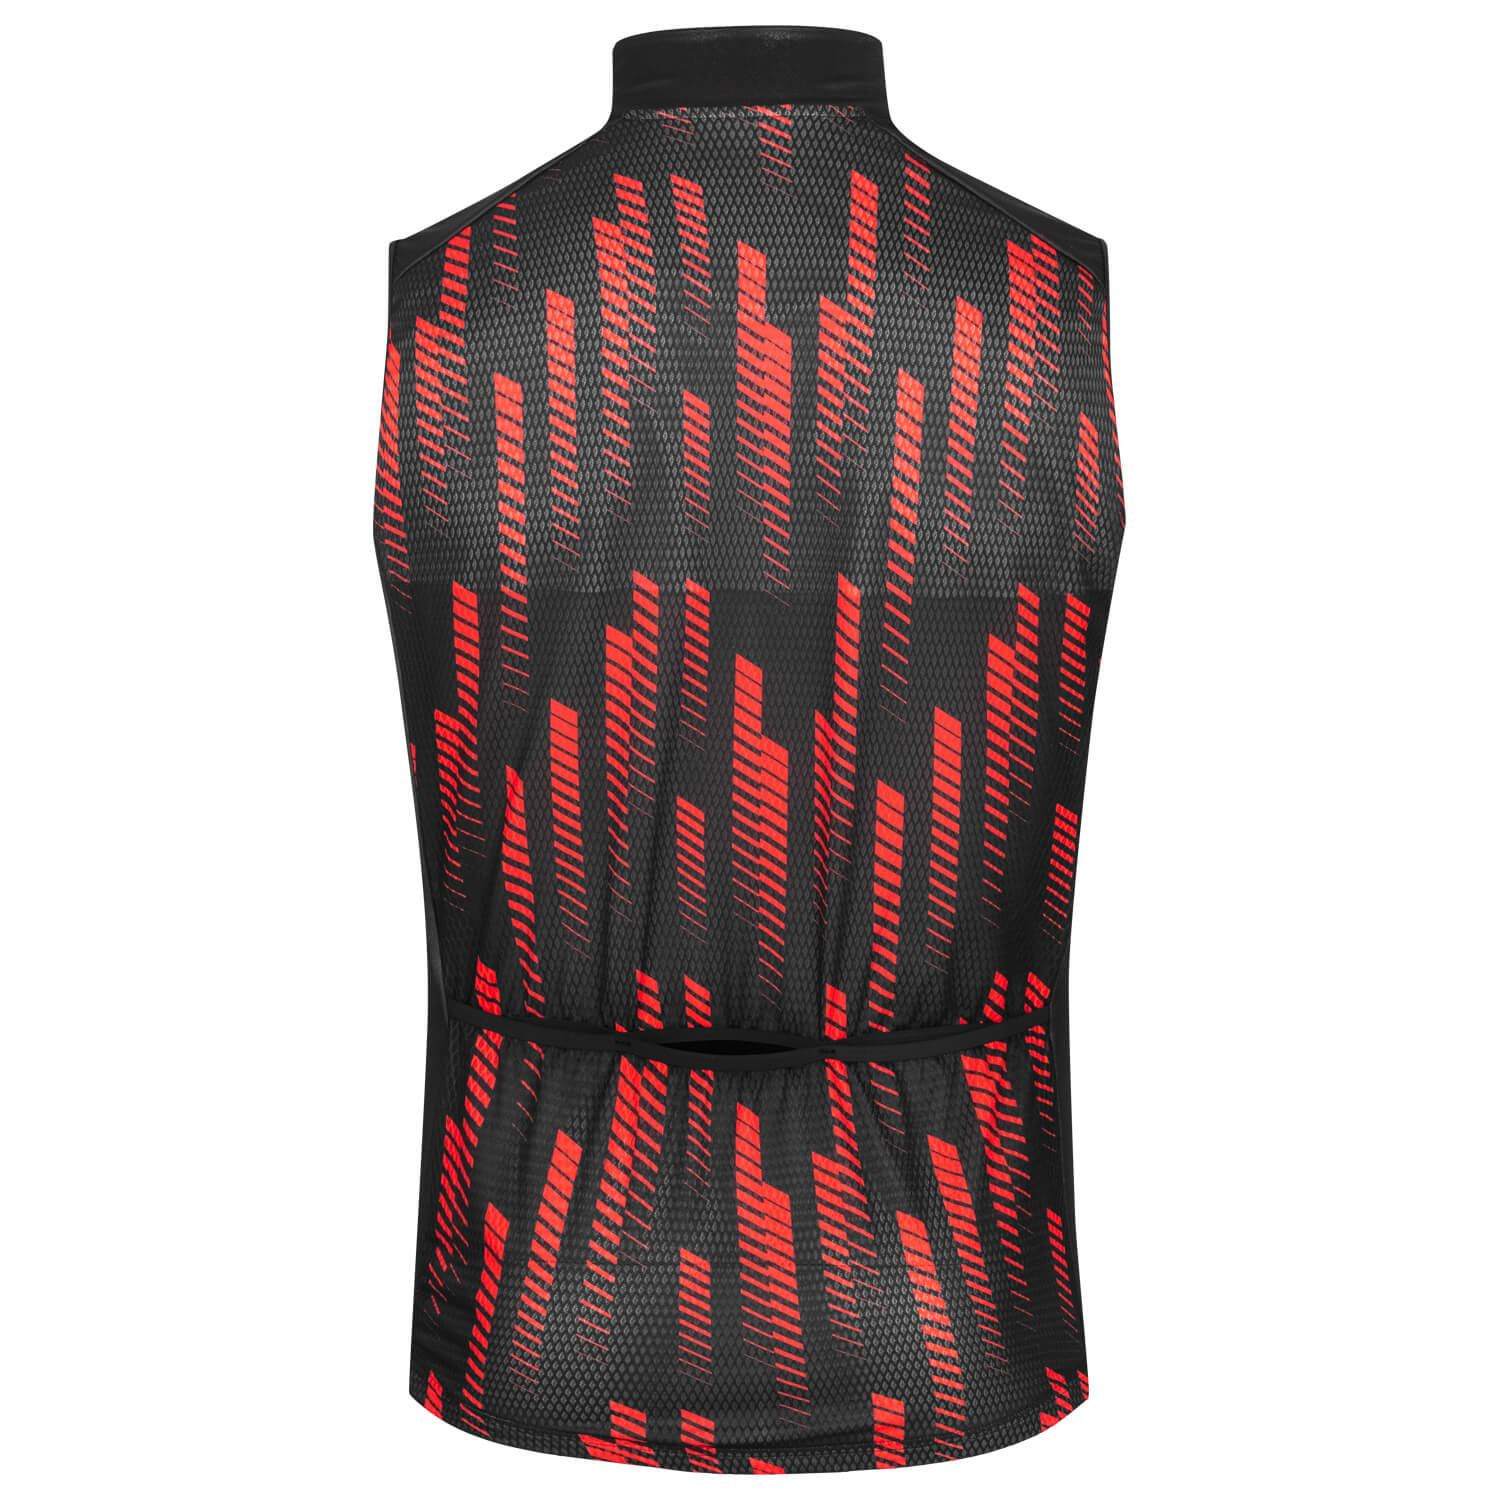 Bild 2: Cycling Vest Red Style 